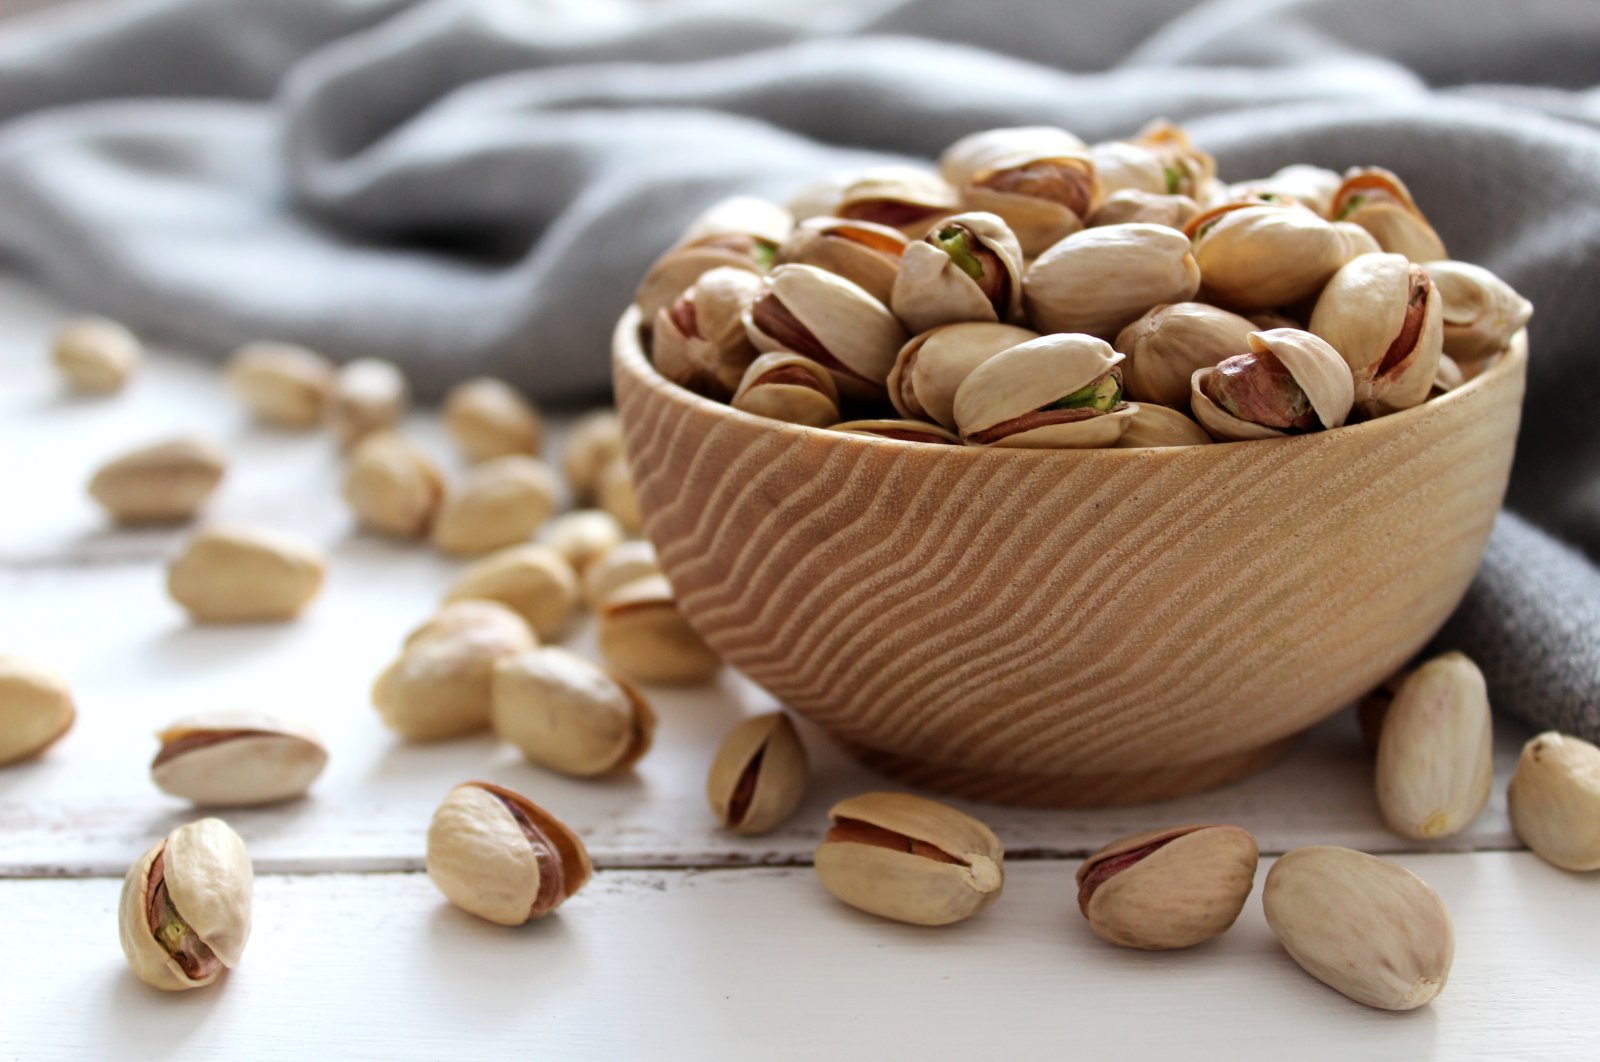 Pistachios nuts in a wooden bowl.